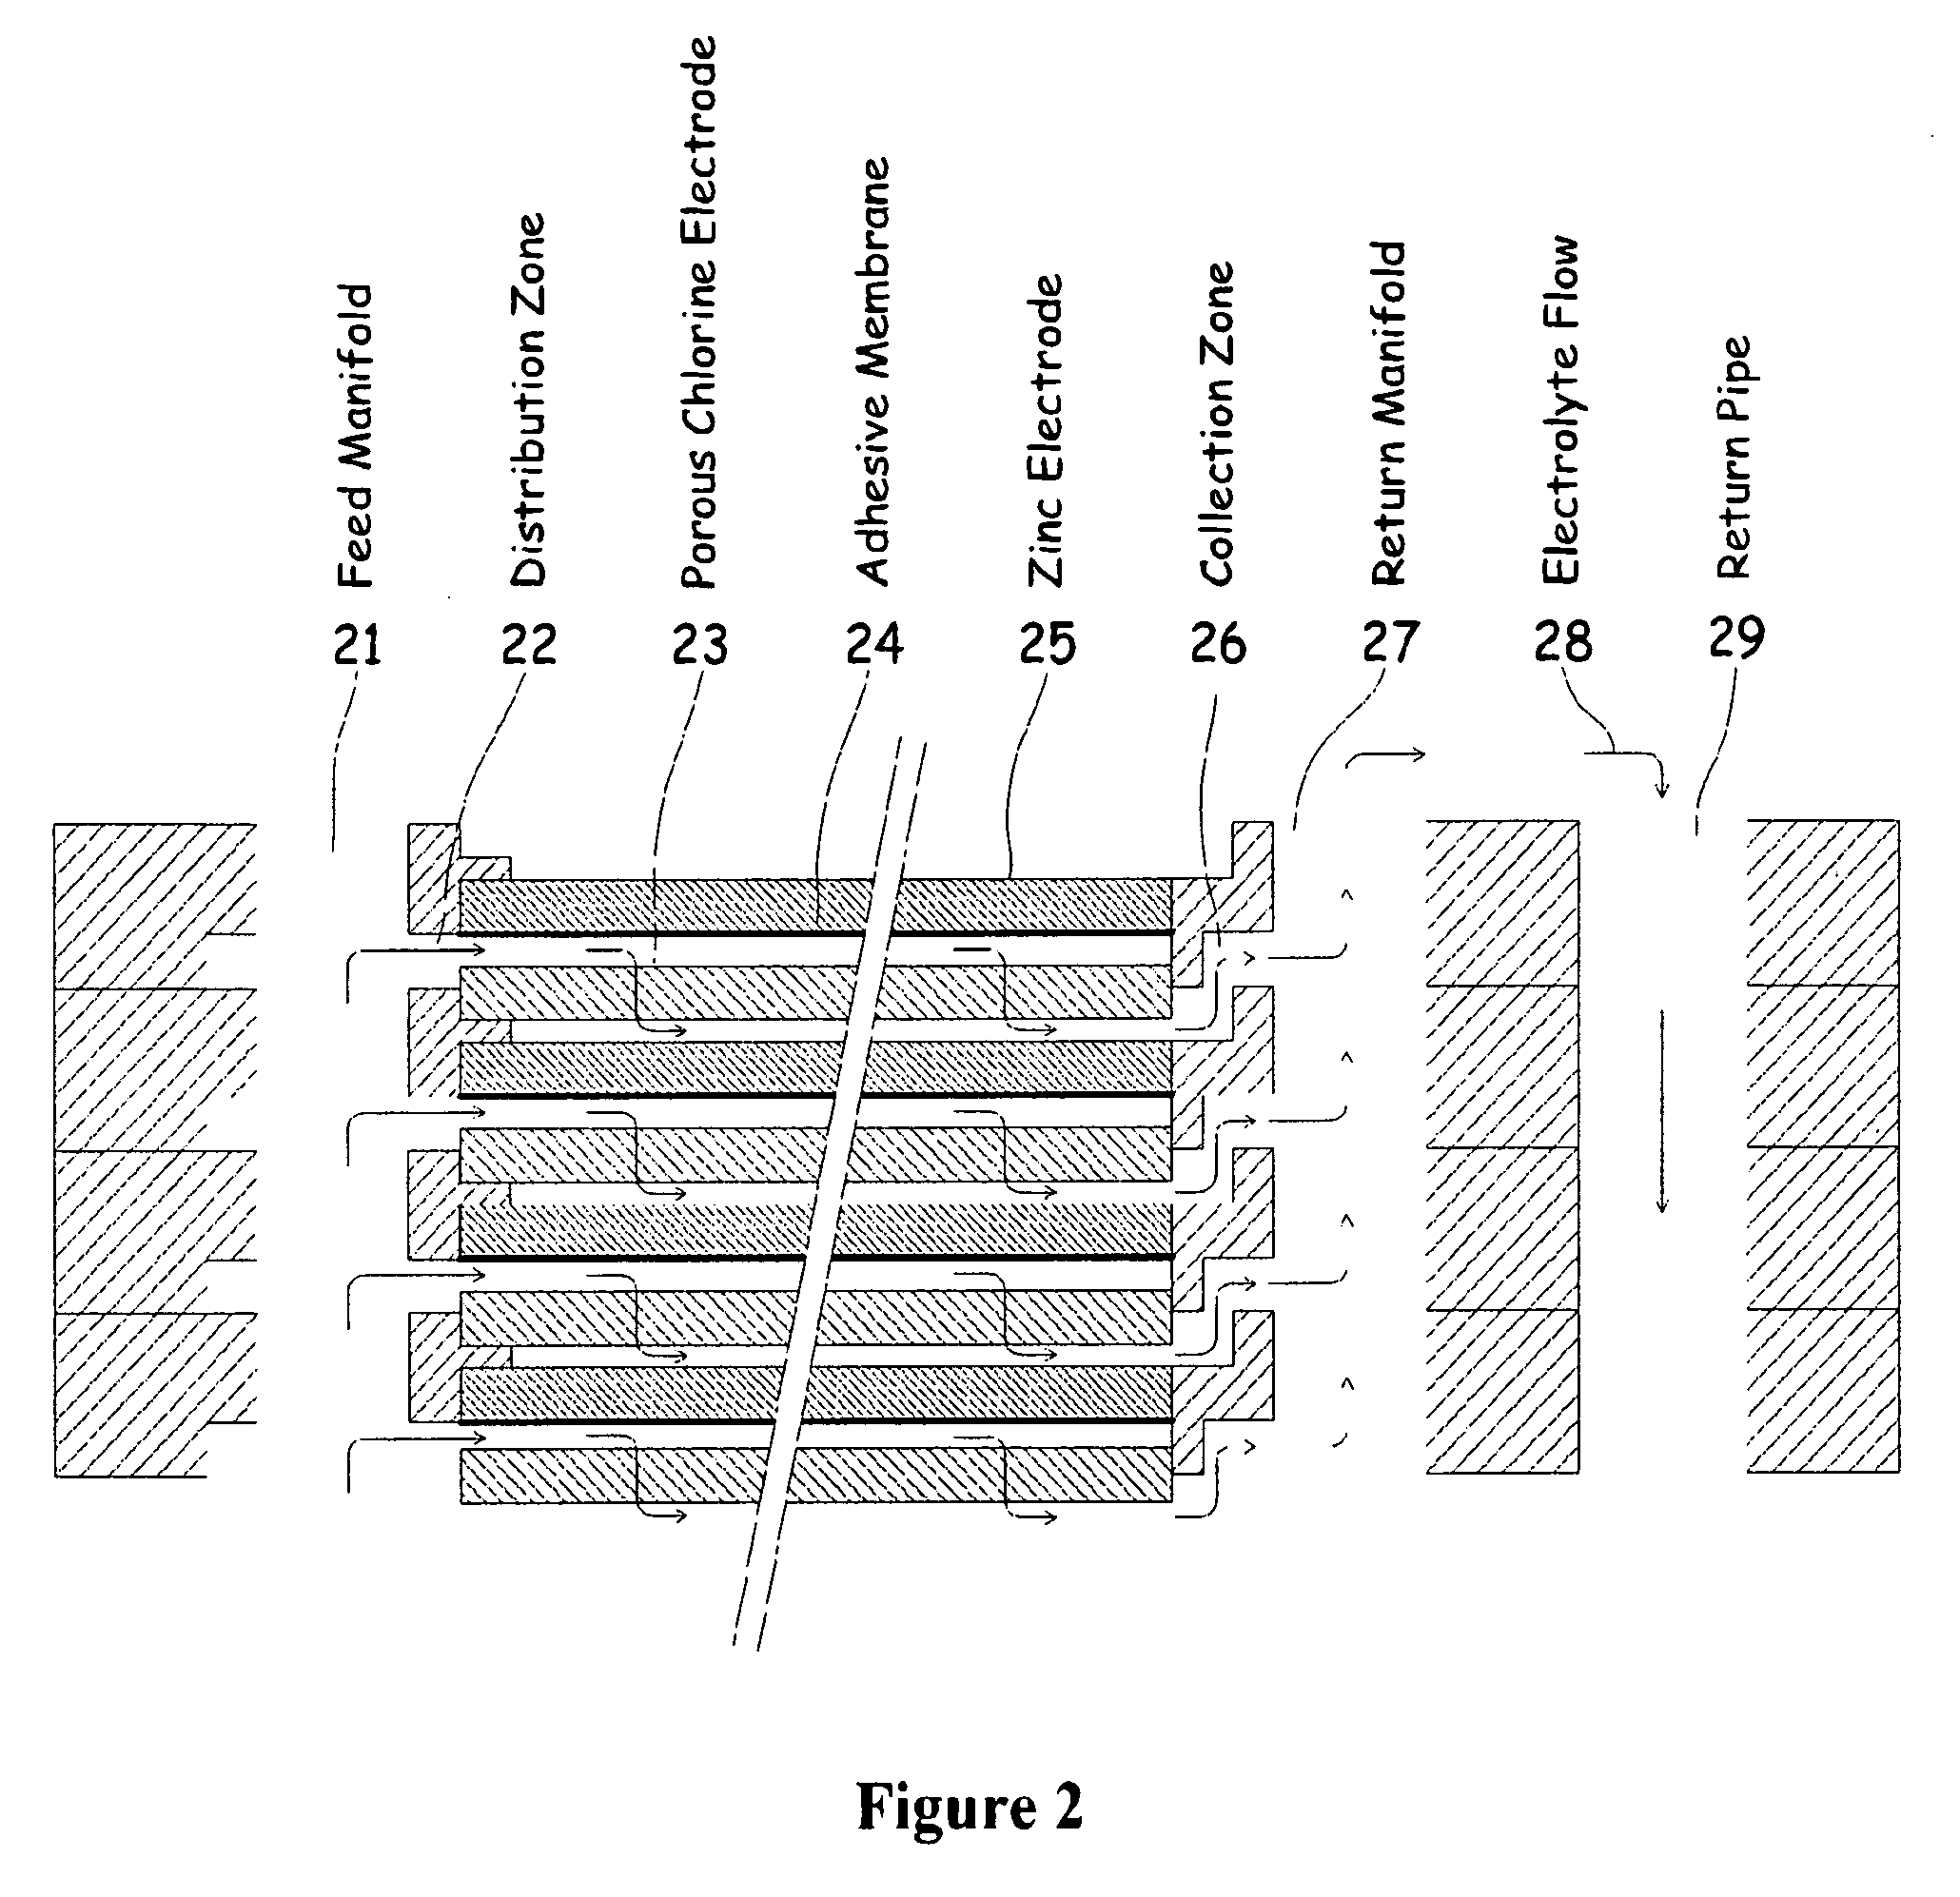 Electrochemical energy cell system